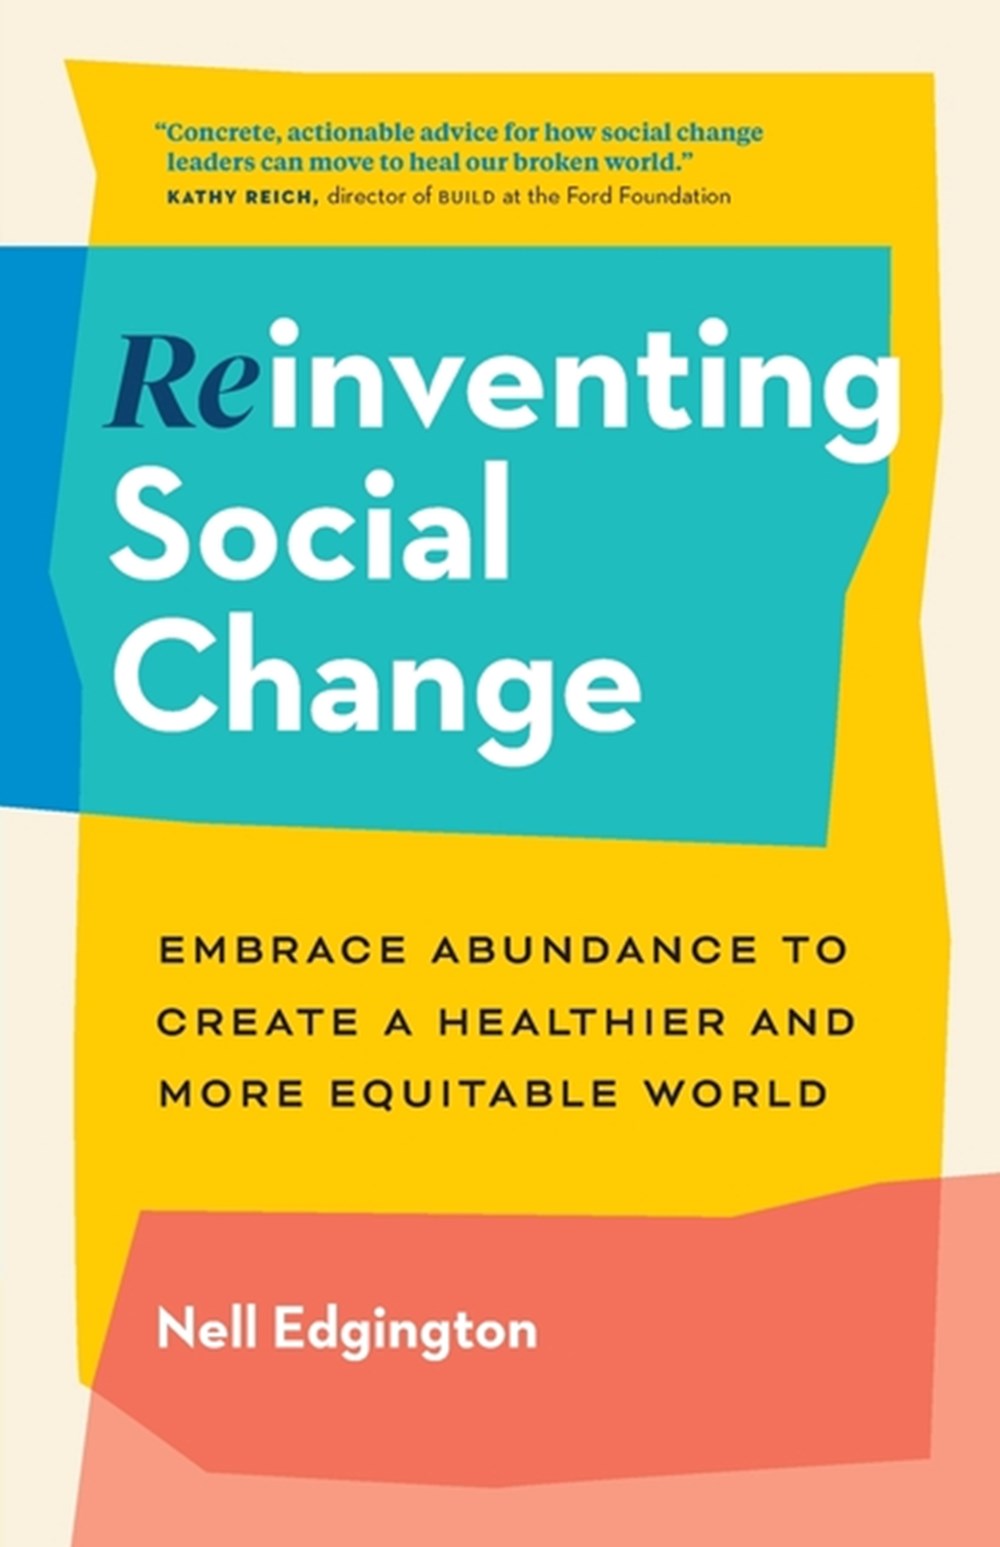 Reinventing Social Change Embrace Abundance to Create a Healthier and More Equitable World